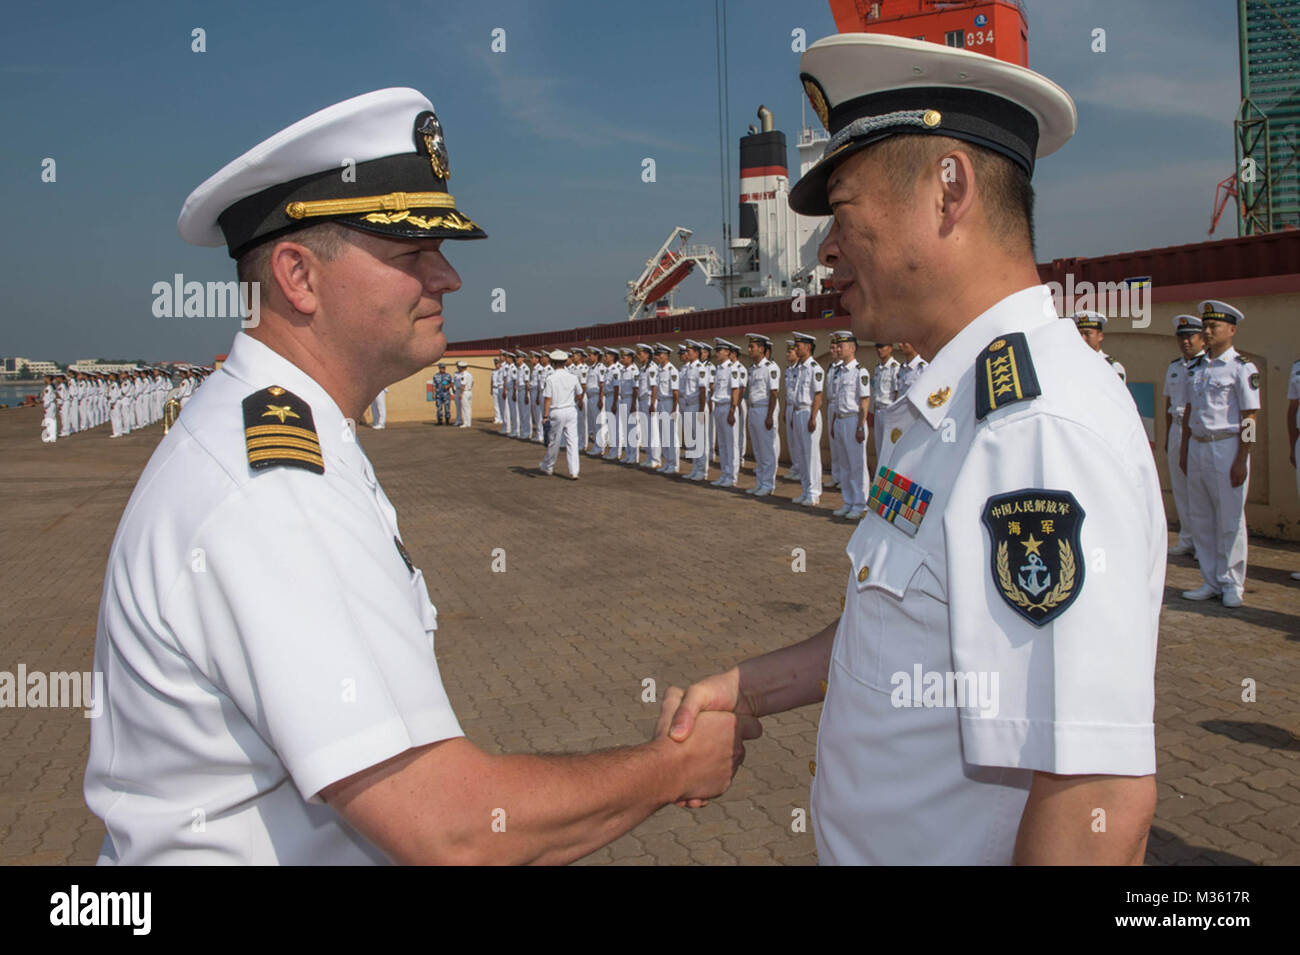 150730-N-UF697-057  QINGDAO, China (July 30, 2015) Cmdr. Harry Marsh, left, commanding officer of the Arleigh Burke-class guided-missile destroyer USS Stethem (DDG 63), bids farewell to Peoples Liberation Army Navy Senior Capt. Jin Wei, director of the General Office of the North Sea Fleet, after a port visit to Qingdao, China. The purpose of the port call in Qingdao is to continue to build key diplomatic and military relationships and to illustrate the U.S. Navy’s commitment to broadening ties in the Indo-Asia-Pacific region. (U.S. Navy photo by Mass Communication Specialist 3rd Class Kevin V Stock Photo